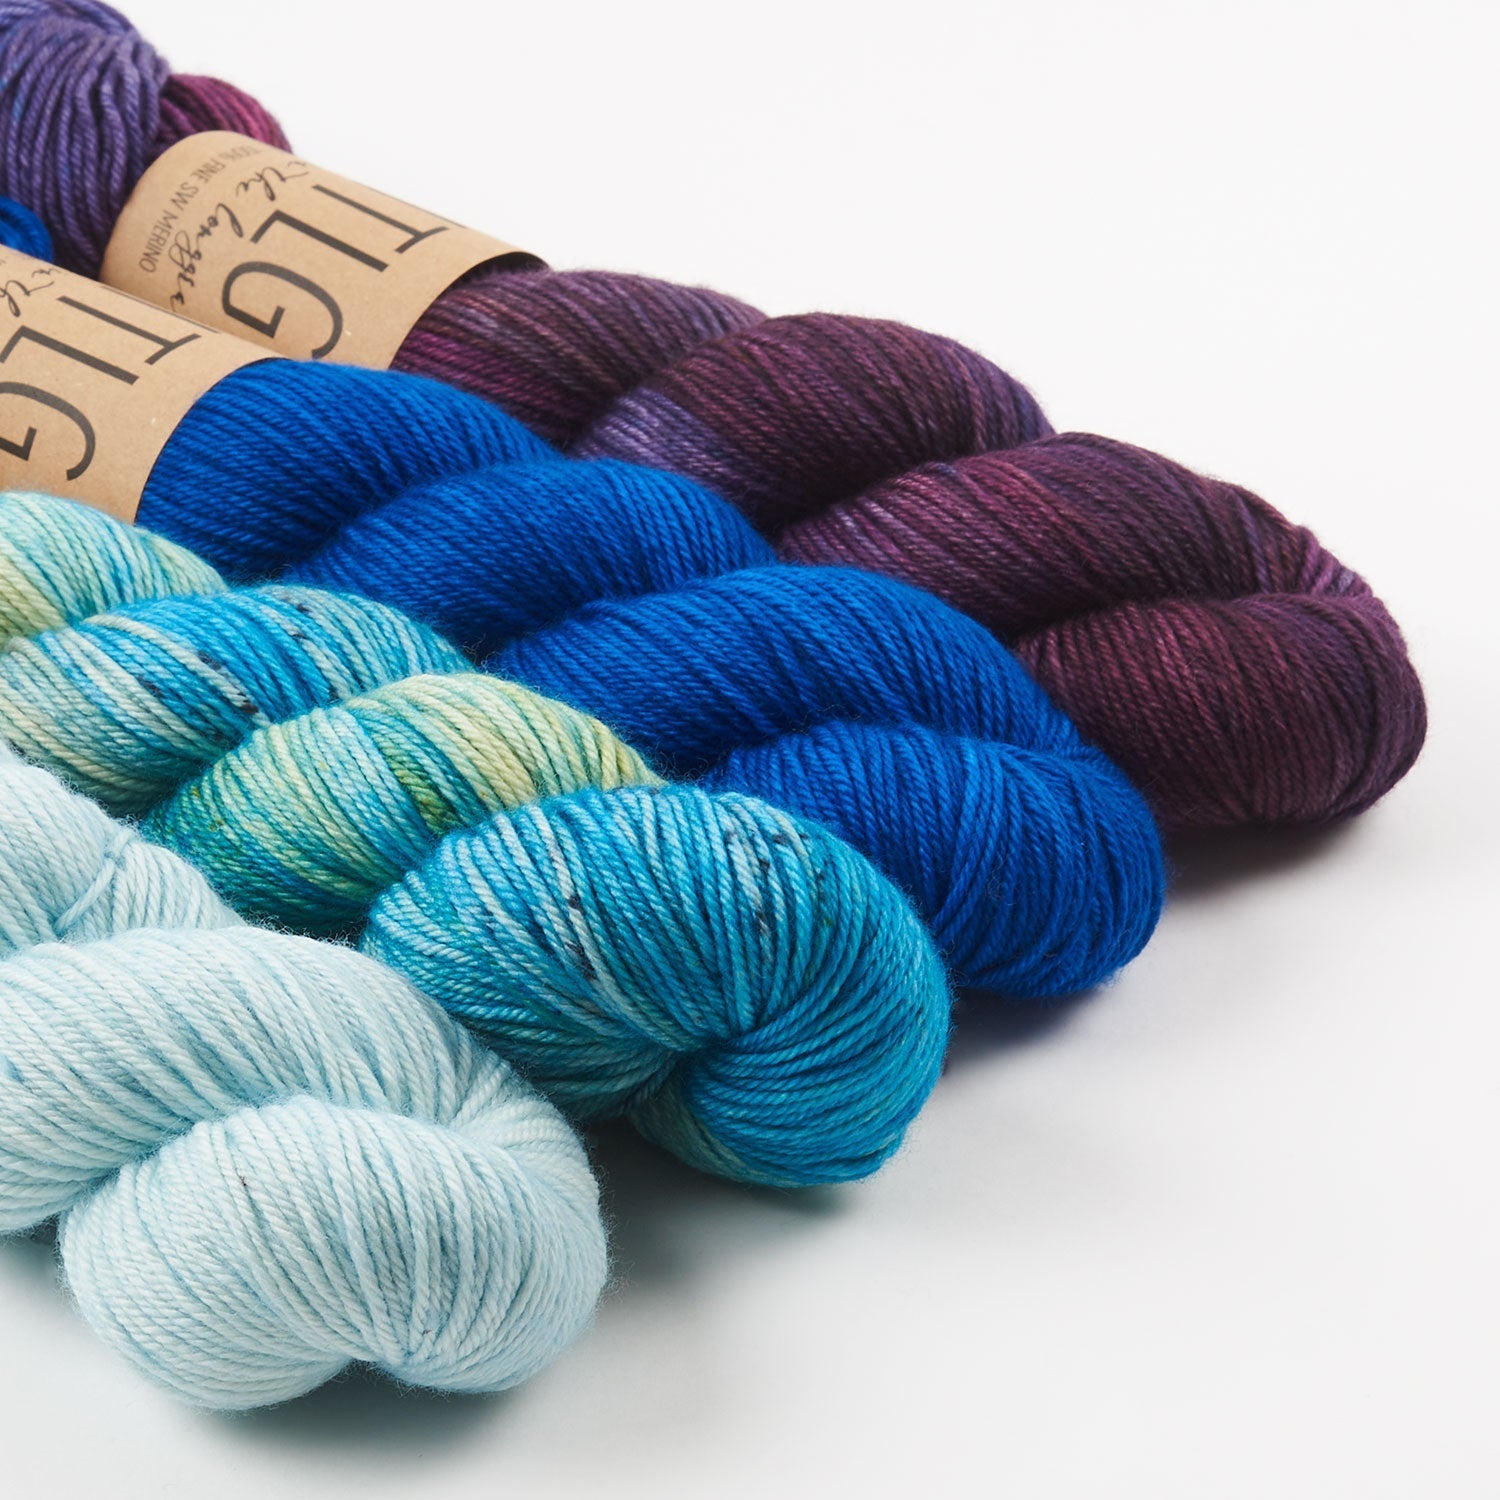 WESTKNITS KIT - ICICLE RIVER